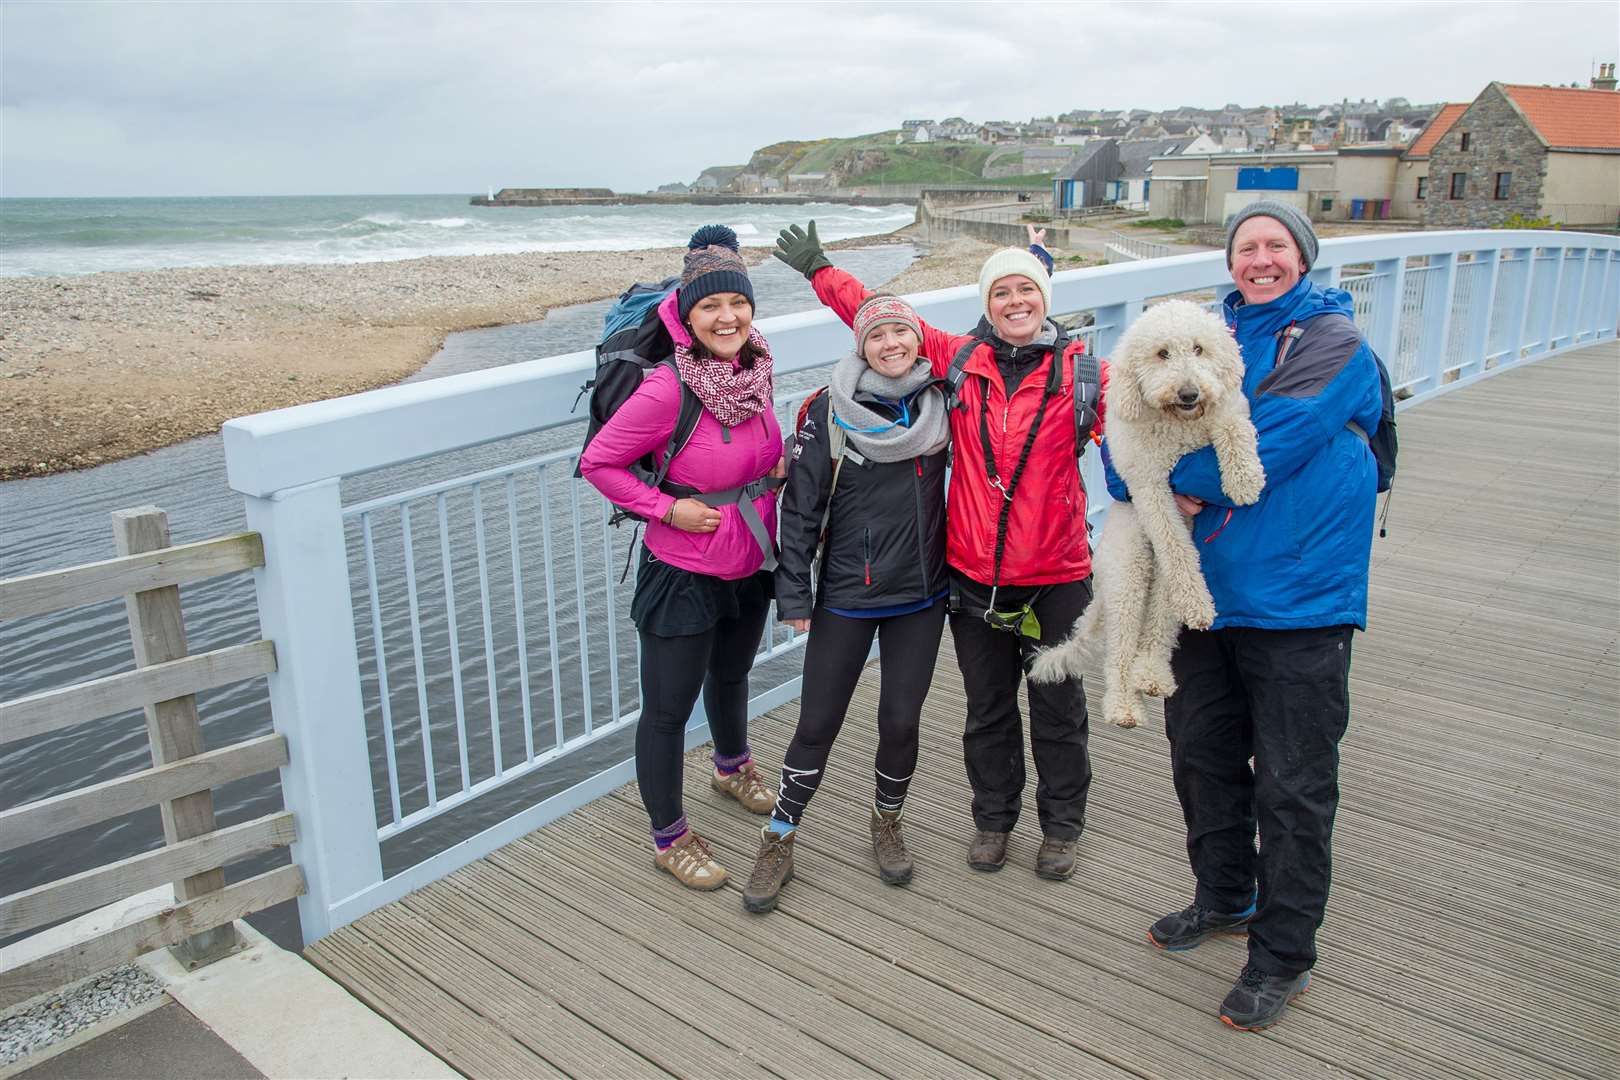 Pausing for a breather at Cullen are (from left) Anete Krievkalne, Bryony Strange, Stephanie McGuiness and Brian McGuiness along with their Golden Doodle Luna. Picture: Daniel Forsyth. Image No.043342.